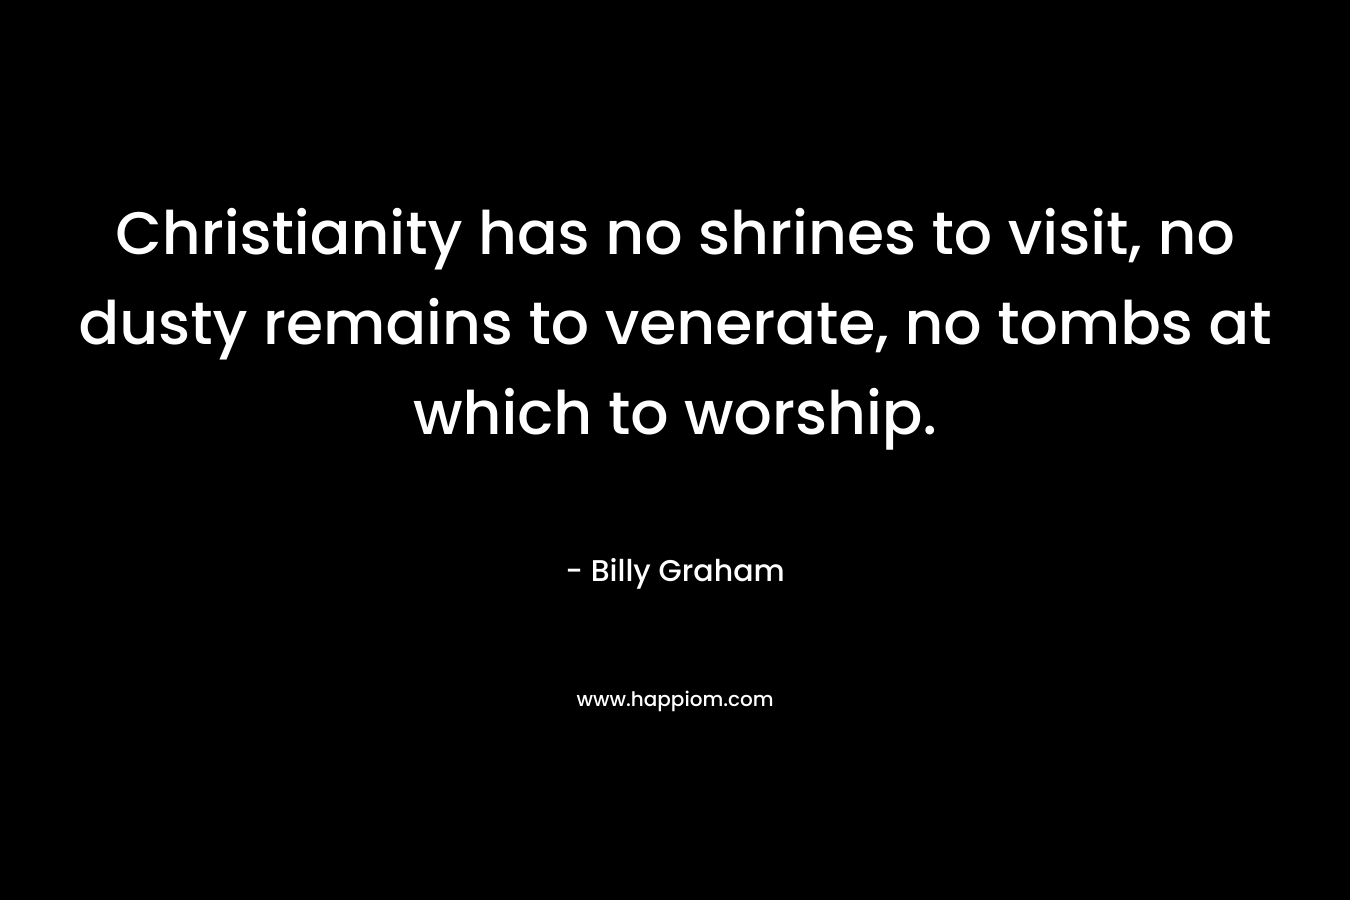 Christianity has no shrines to visit, no dusty remains to venerate, no tombs at which to worship. – Billy Graham